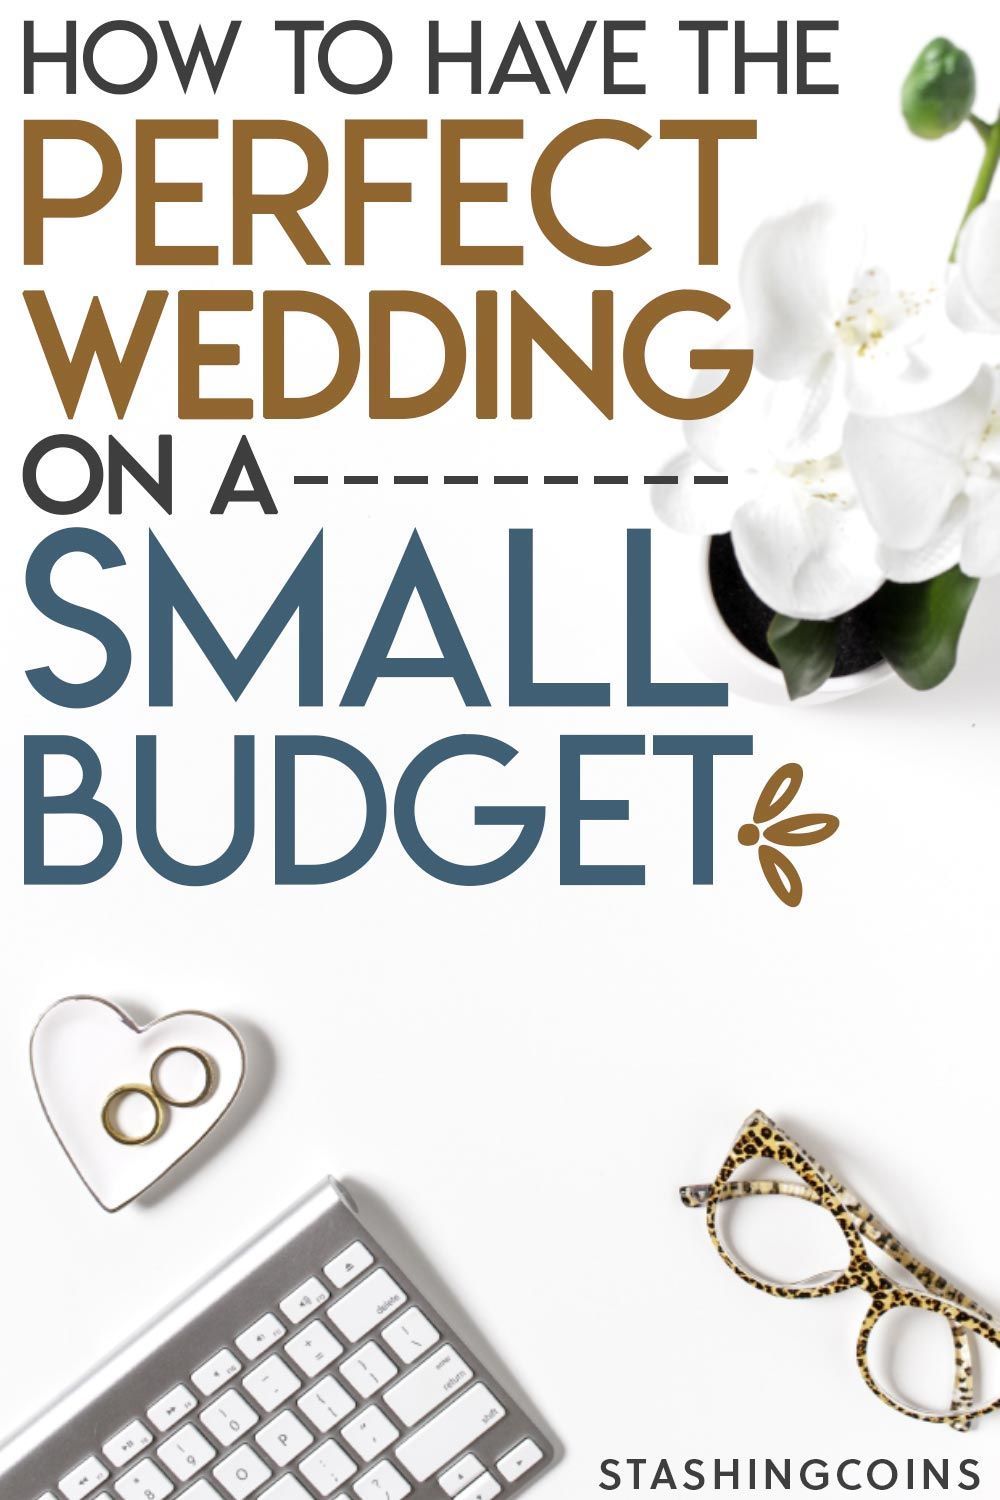 Wedding planning on a budget? Here's how to have the perfect wedding on a budget -   11 wedding Simple on a budget ideas